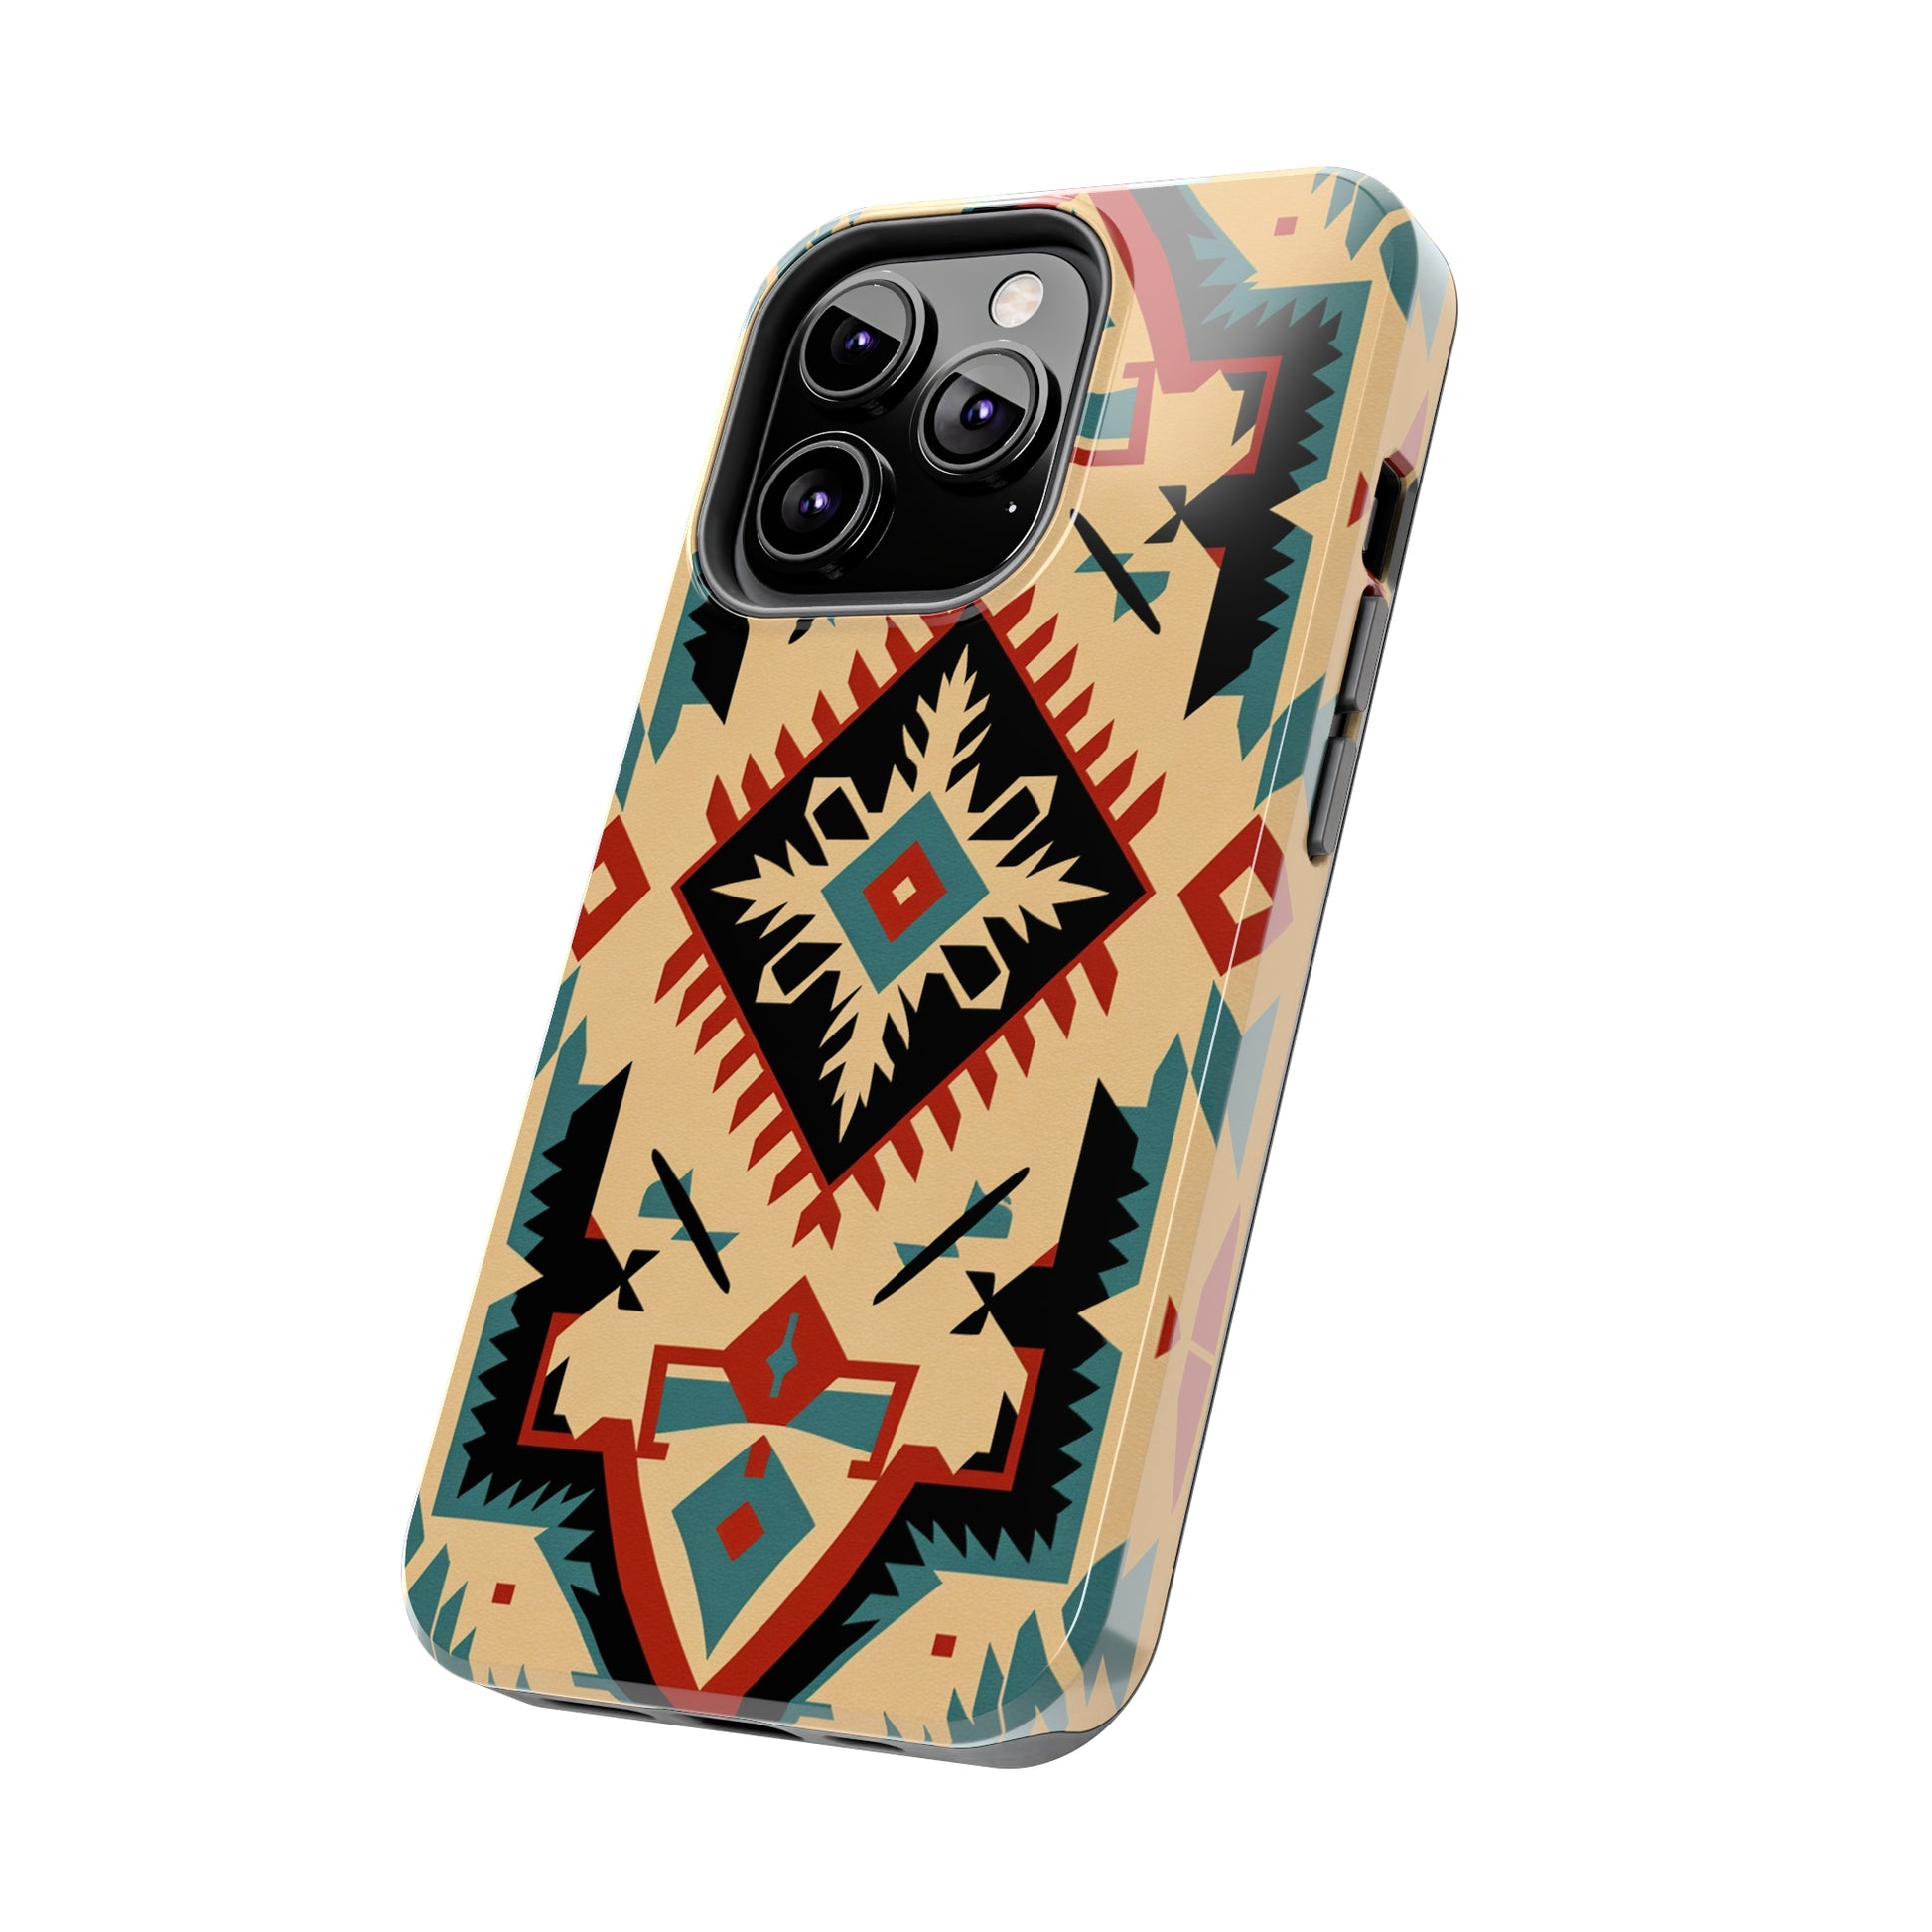 Cultural heritage artistic iPhone cover